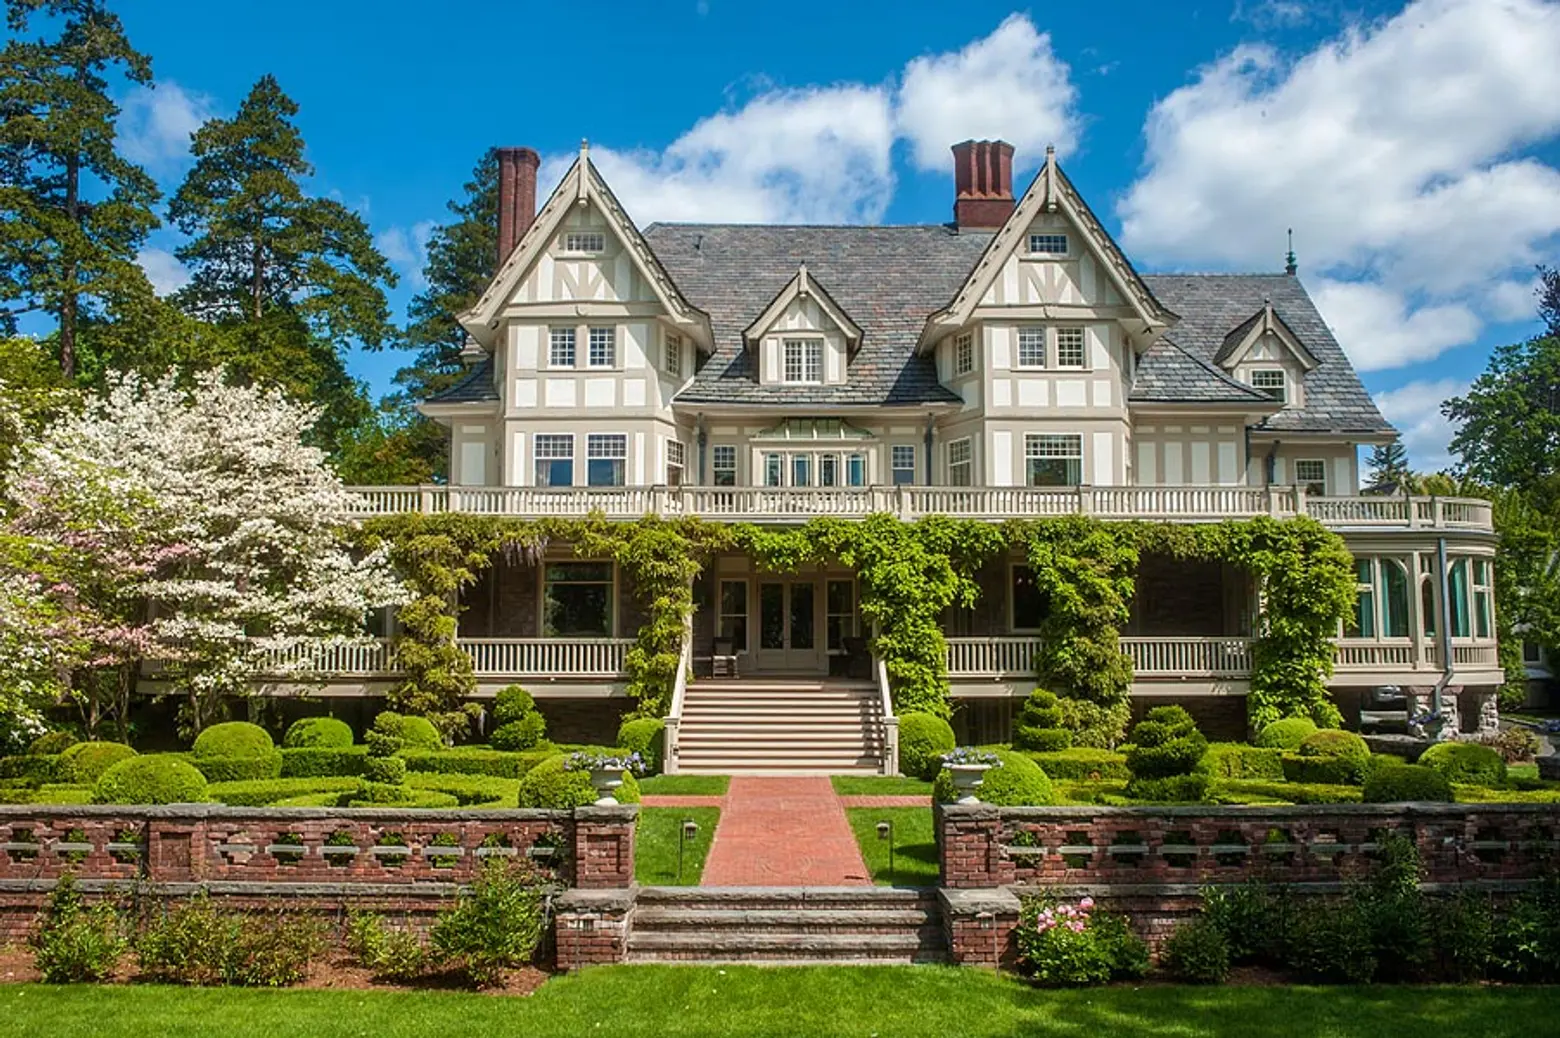 19th-century Connecticut ‘manor’ has English gardens and a coachman’s cottage for $15.9M